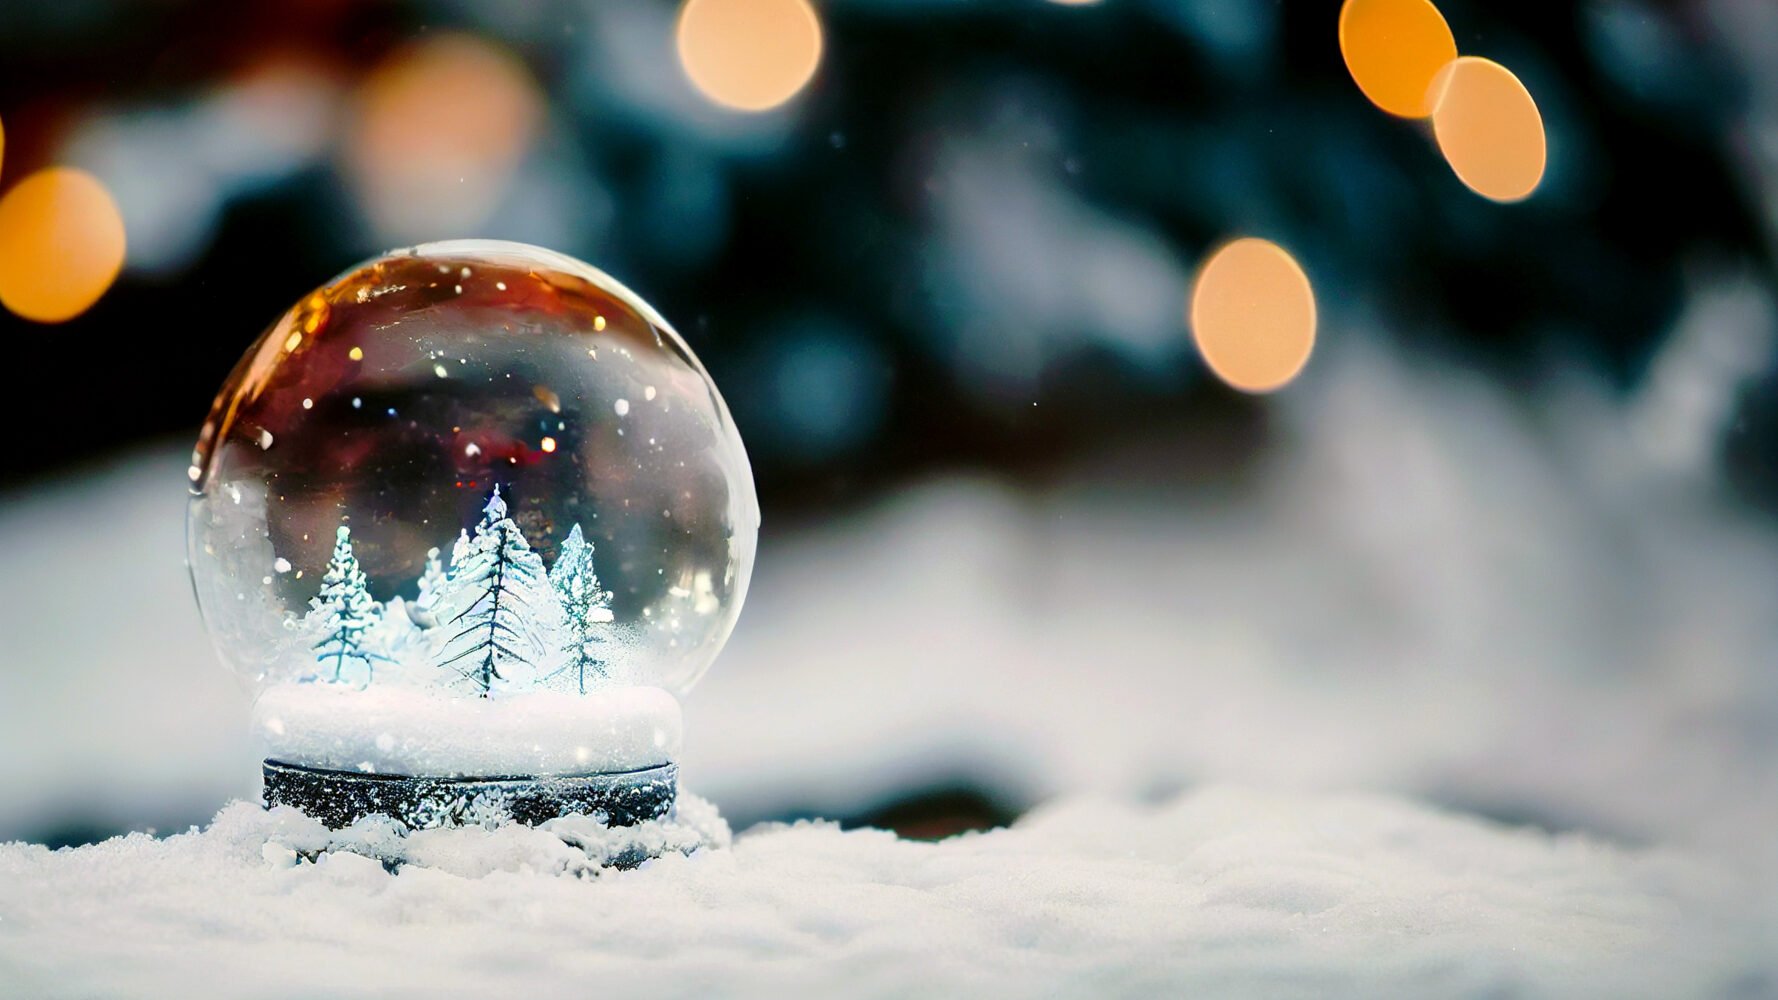 a snow globe placed on a snowbank, with trees and lights out of focus behind